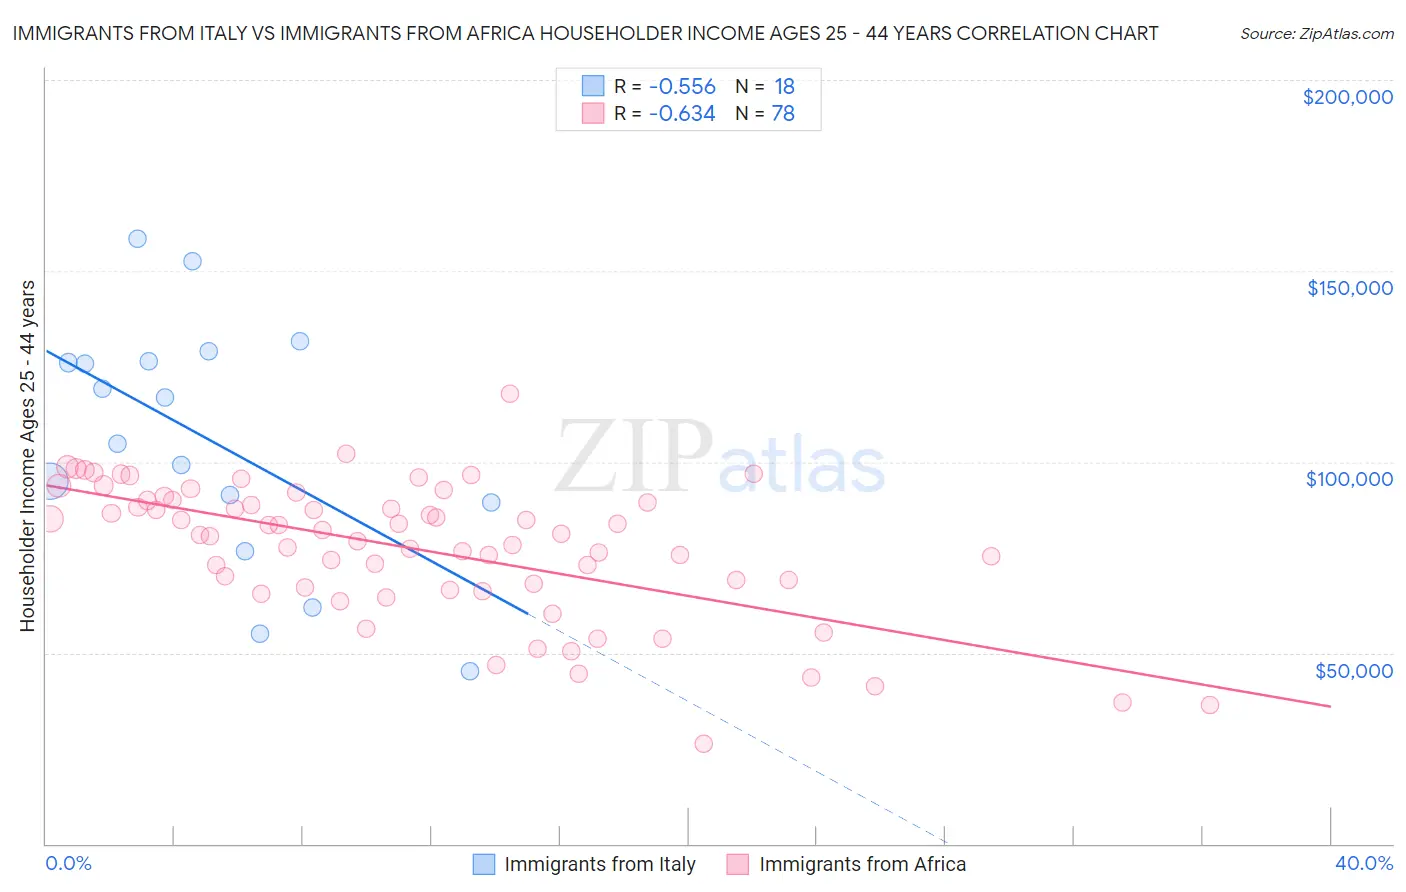 Immigrants from Italy vs Immigrants from Africa Householder Income Ages 25 - 44 years